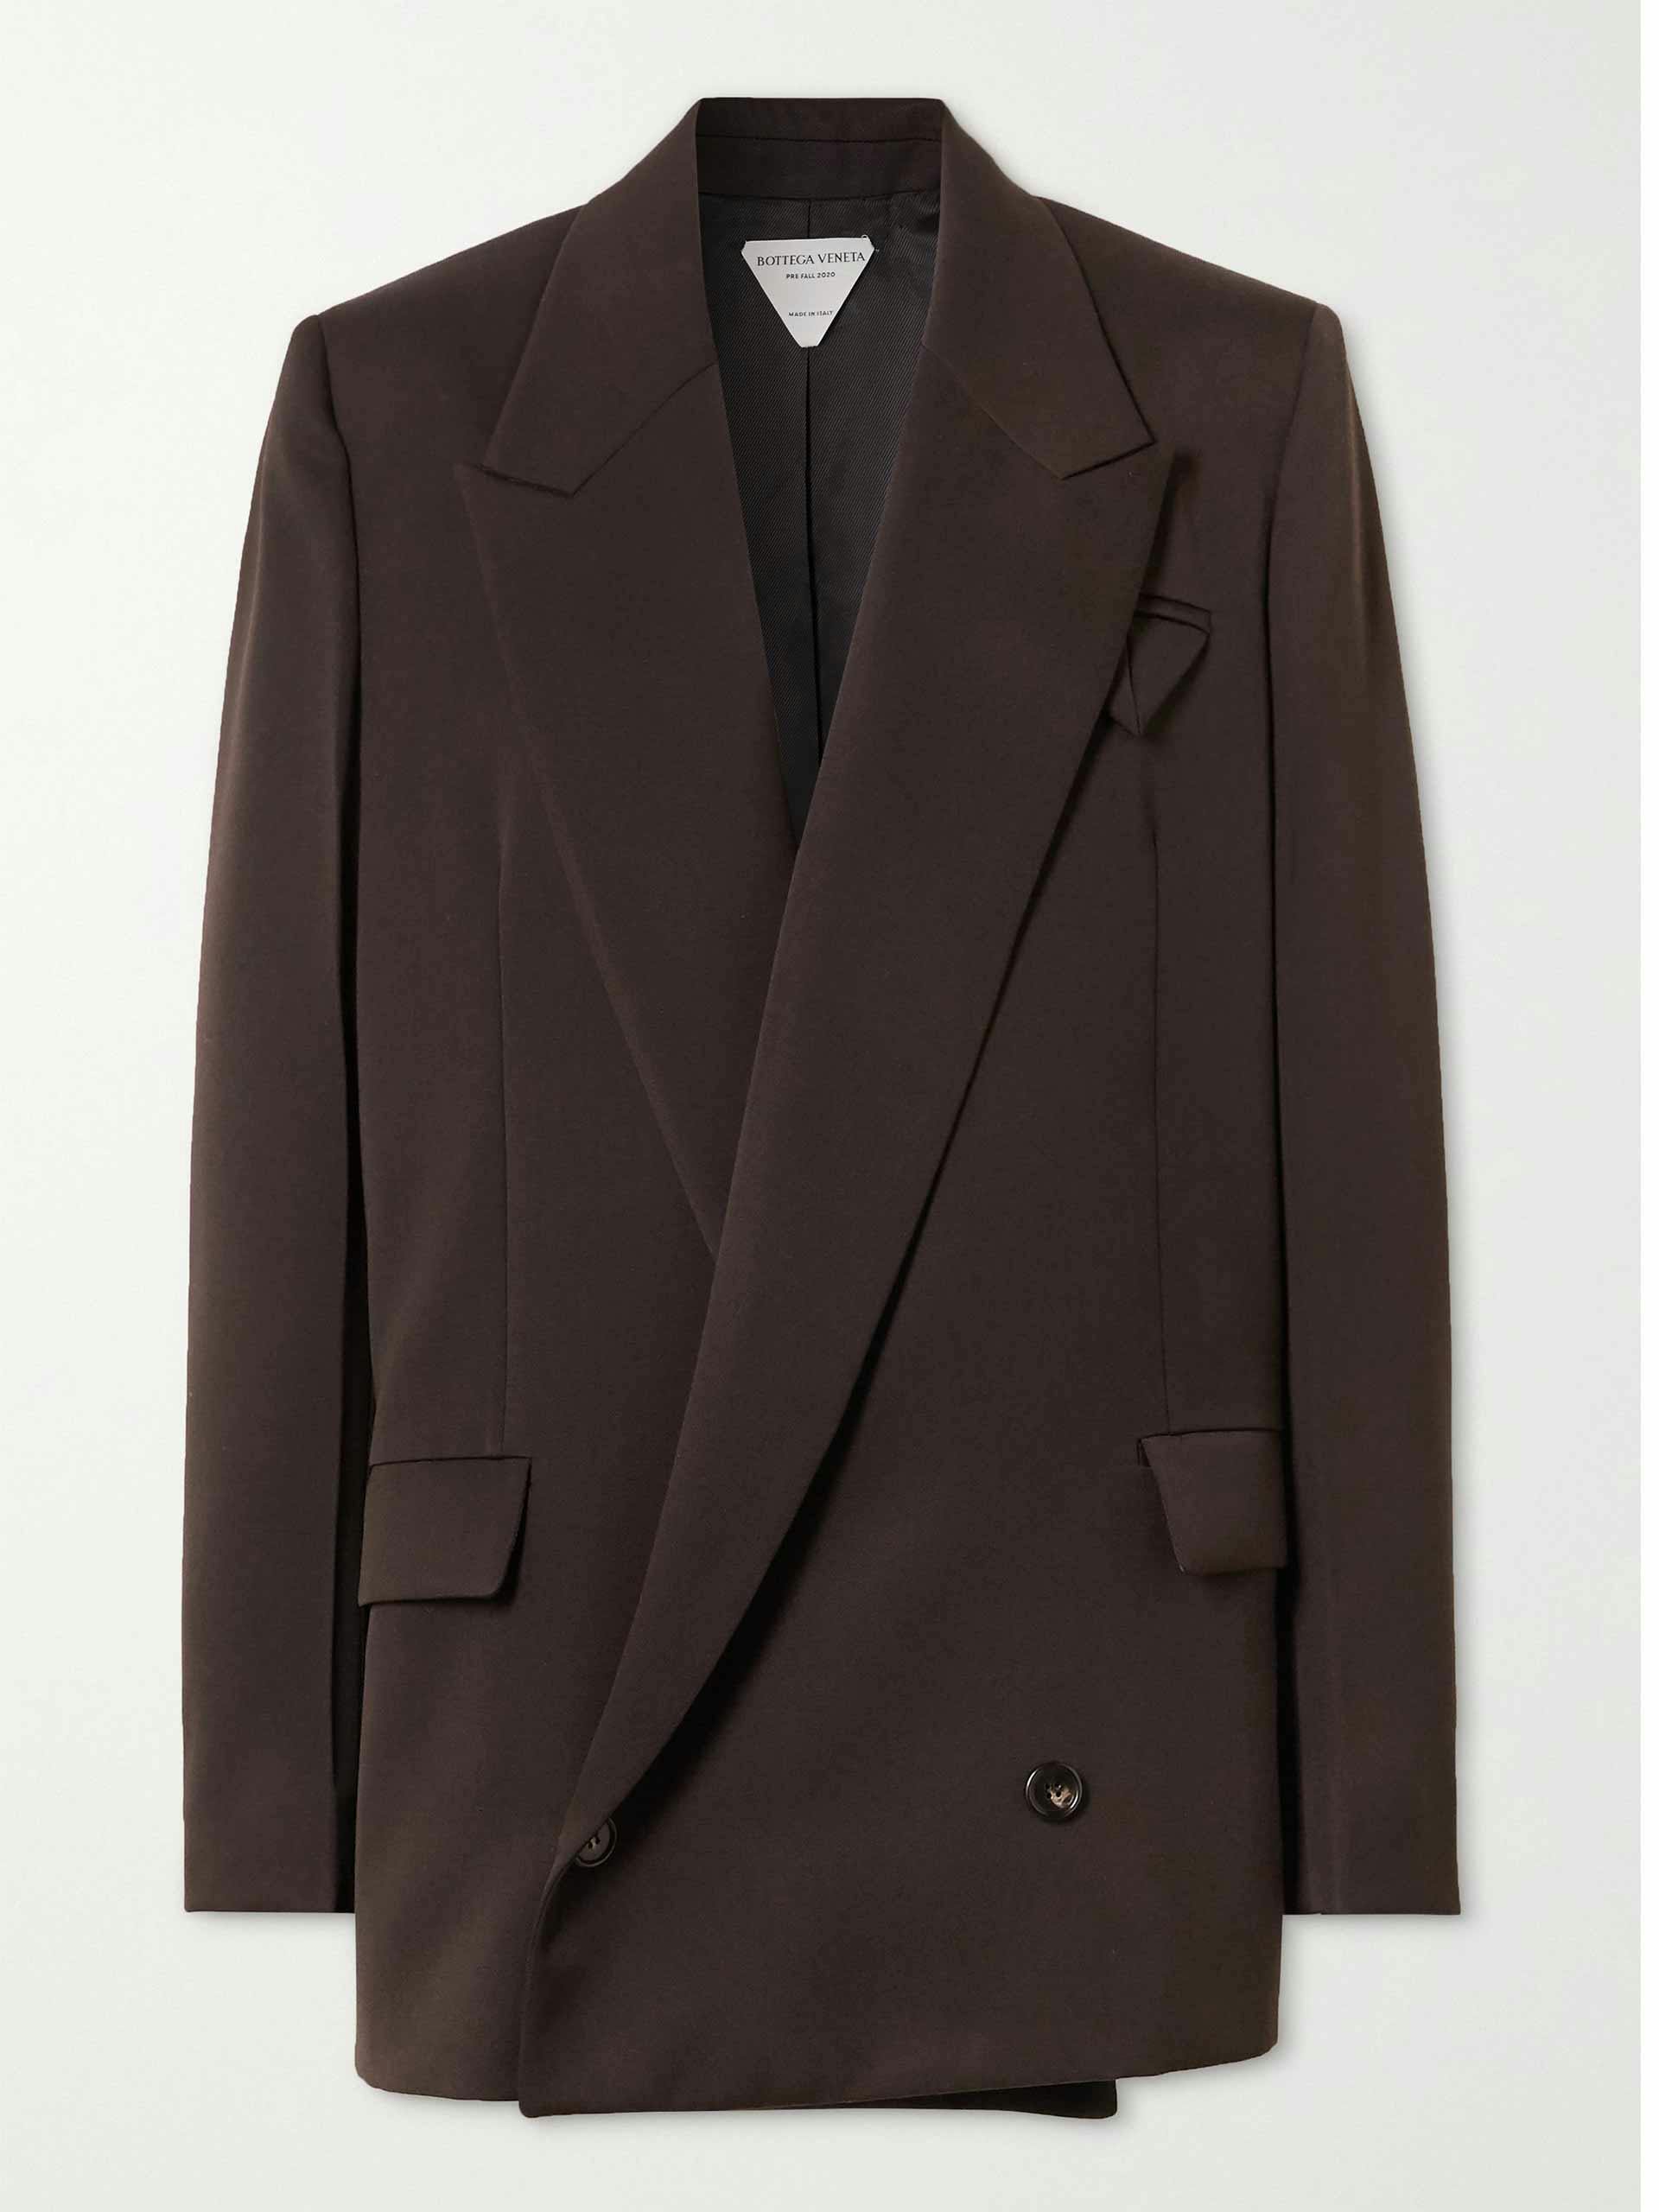 Brown double-breasted blazer